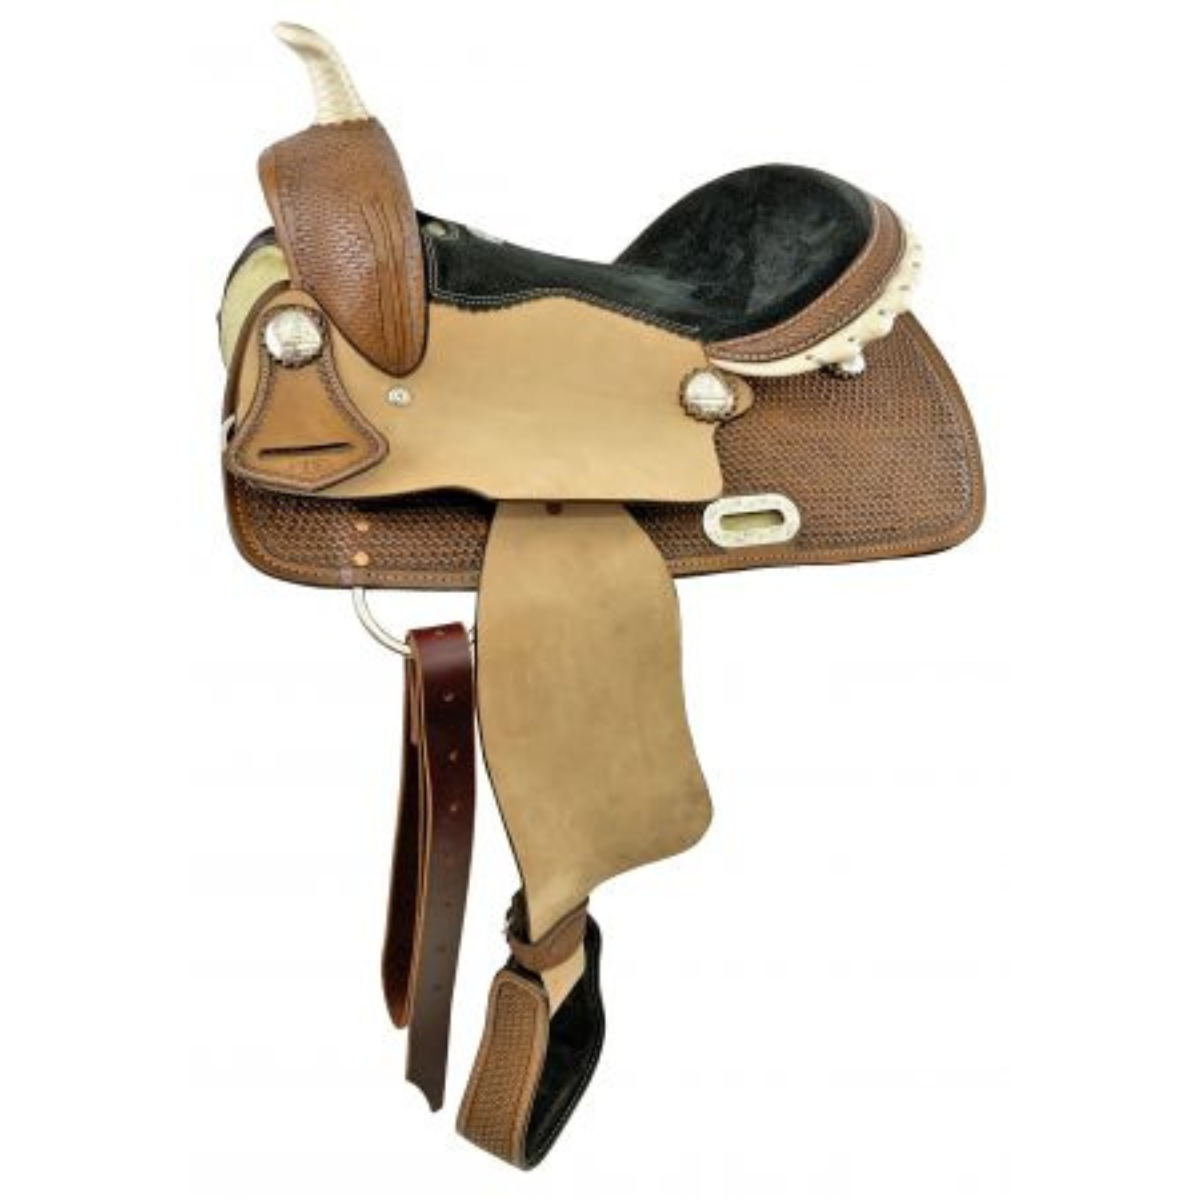 15", 16" DOUBLE T BARREL SADDLE W/ MATCHING HEADSTALL & BREAST COLLAR - Double T Saddles